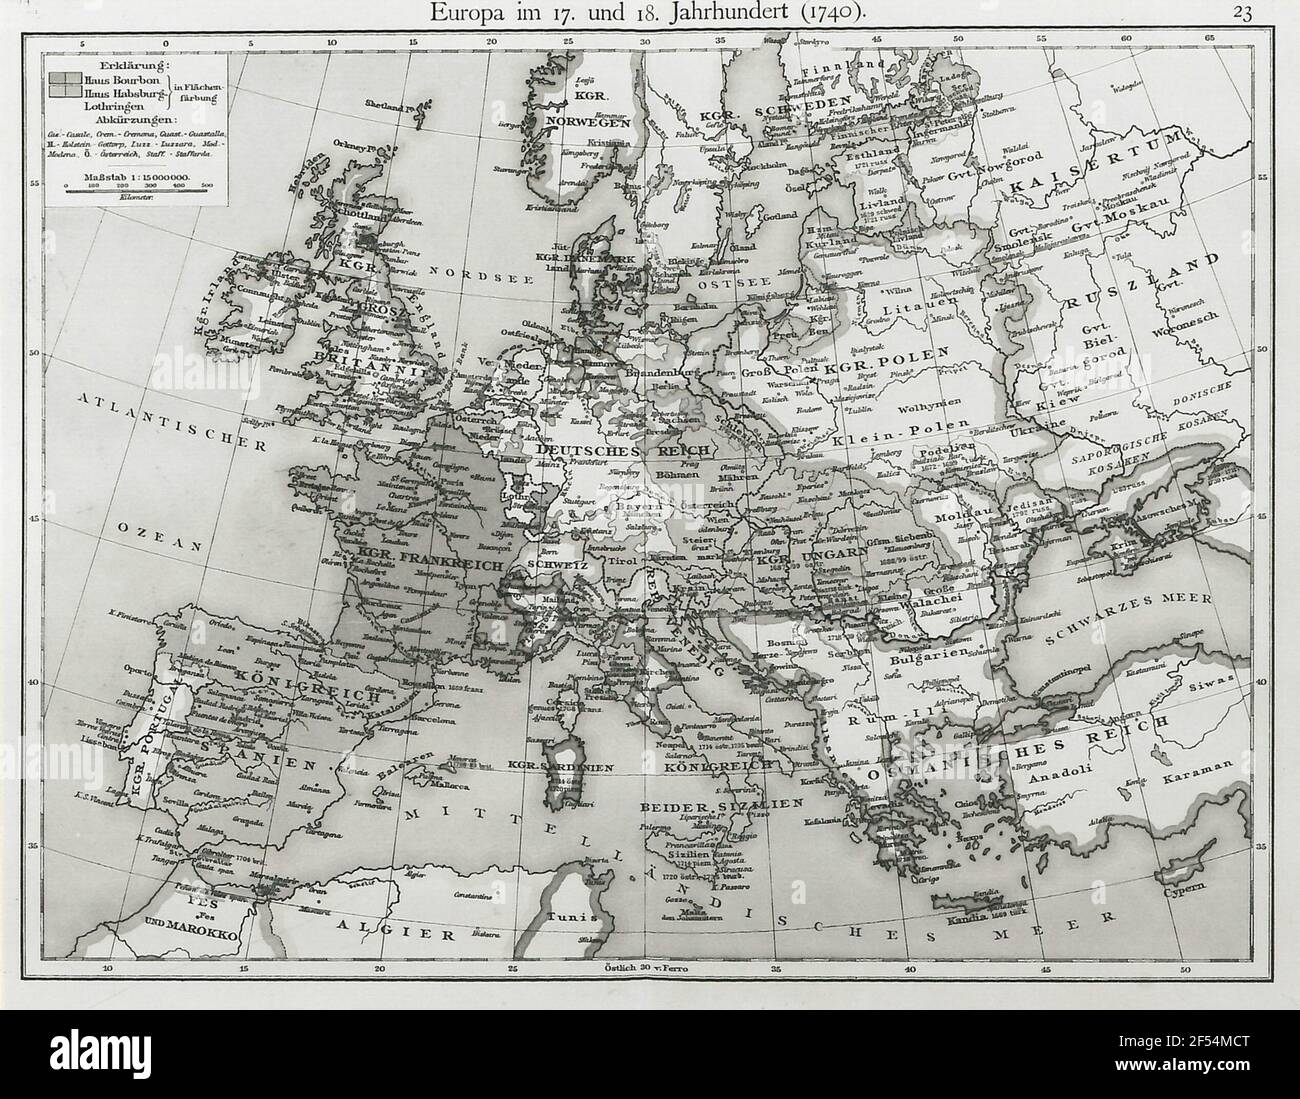 Europe in the 17th and 18th centuries (1740). Scale 1: 15000000. Map 23 from: F. W. Putzgers Historical School Atlas: To the old, medium and new history. Edited by Alfred Baldamus and Ernst Schwabe. Multi-color printing. Bielefeld and Leipzig: Velhagen & Klasing, 1904 (28th edition) Stock Photo